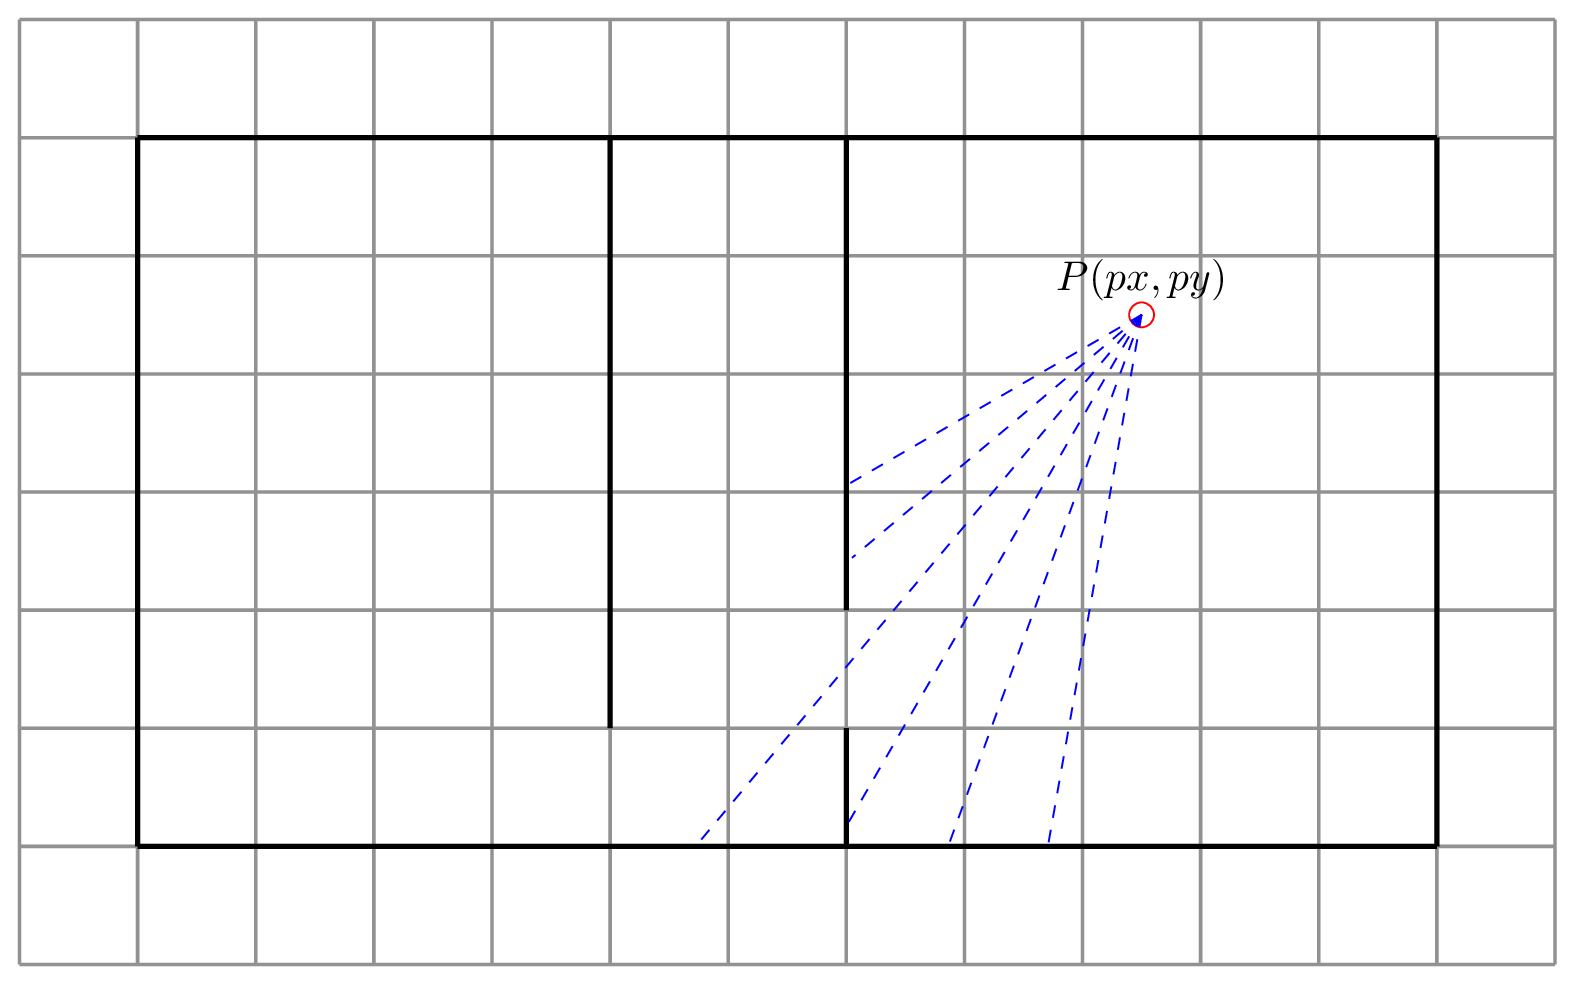 A top down view of a grid shows rays being cast from a point of origin P into the world and striking walls